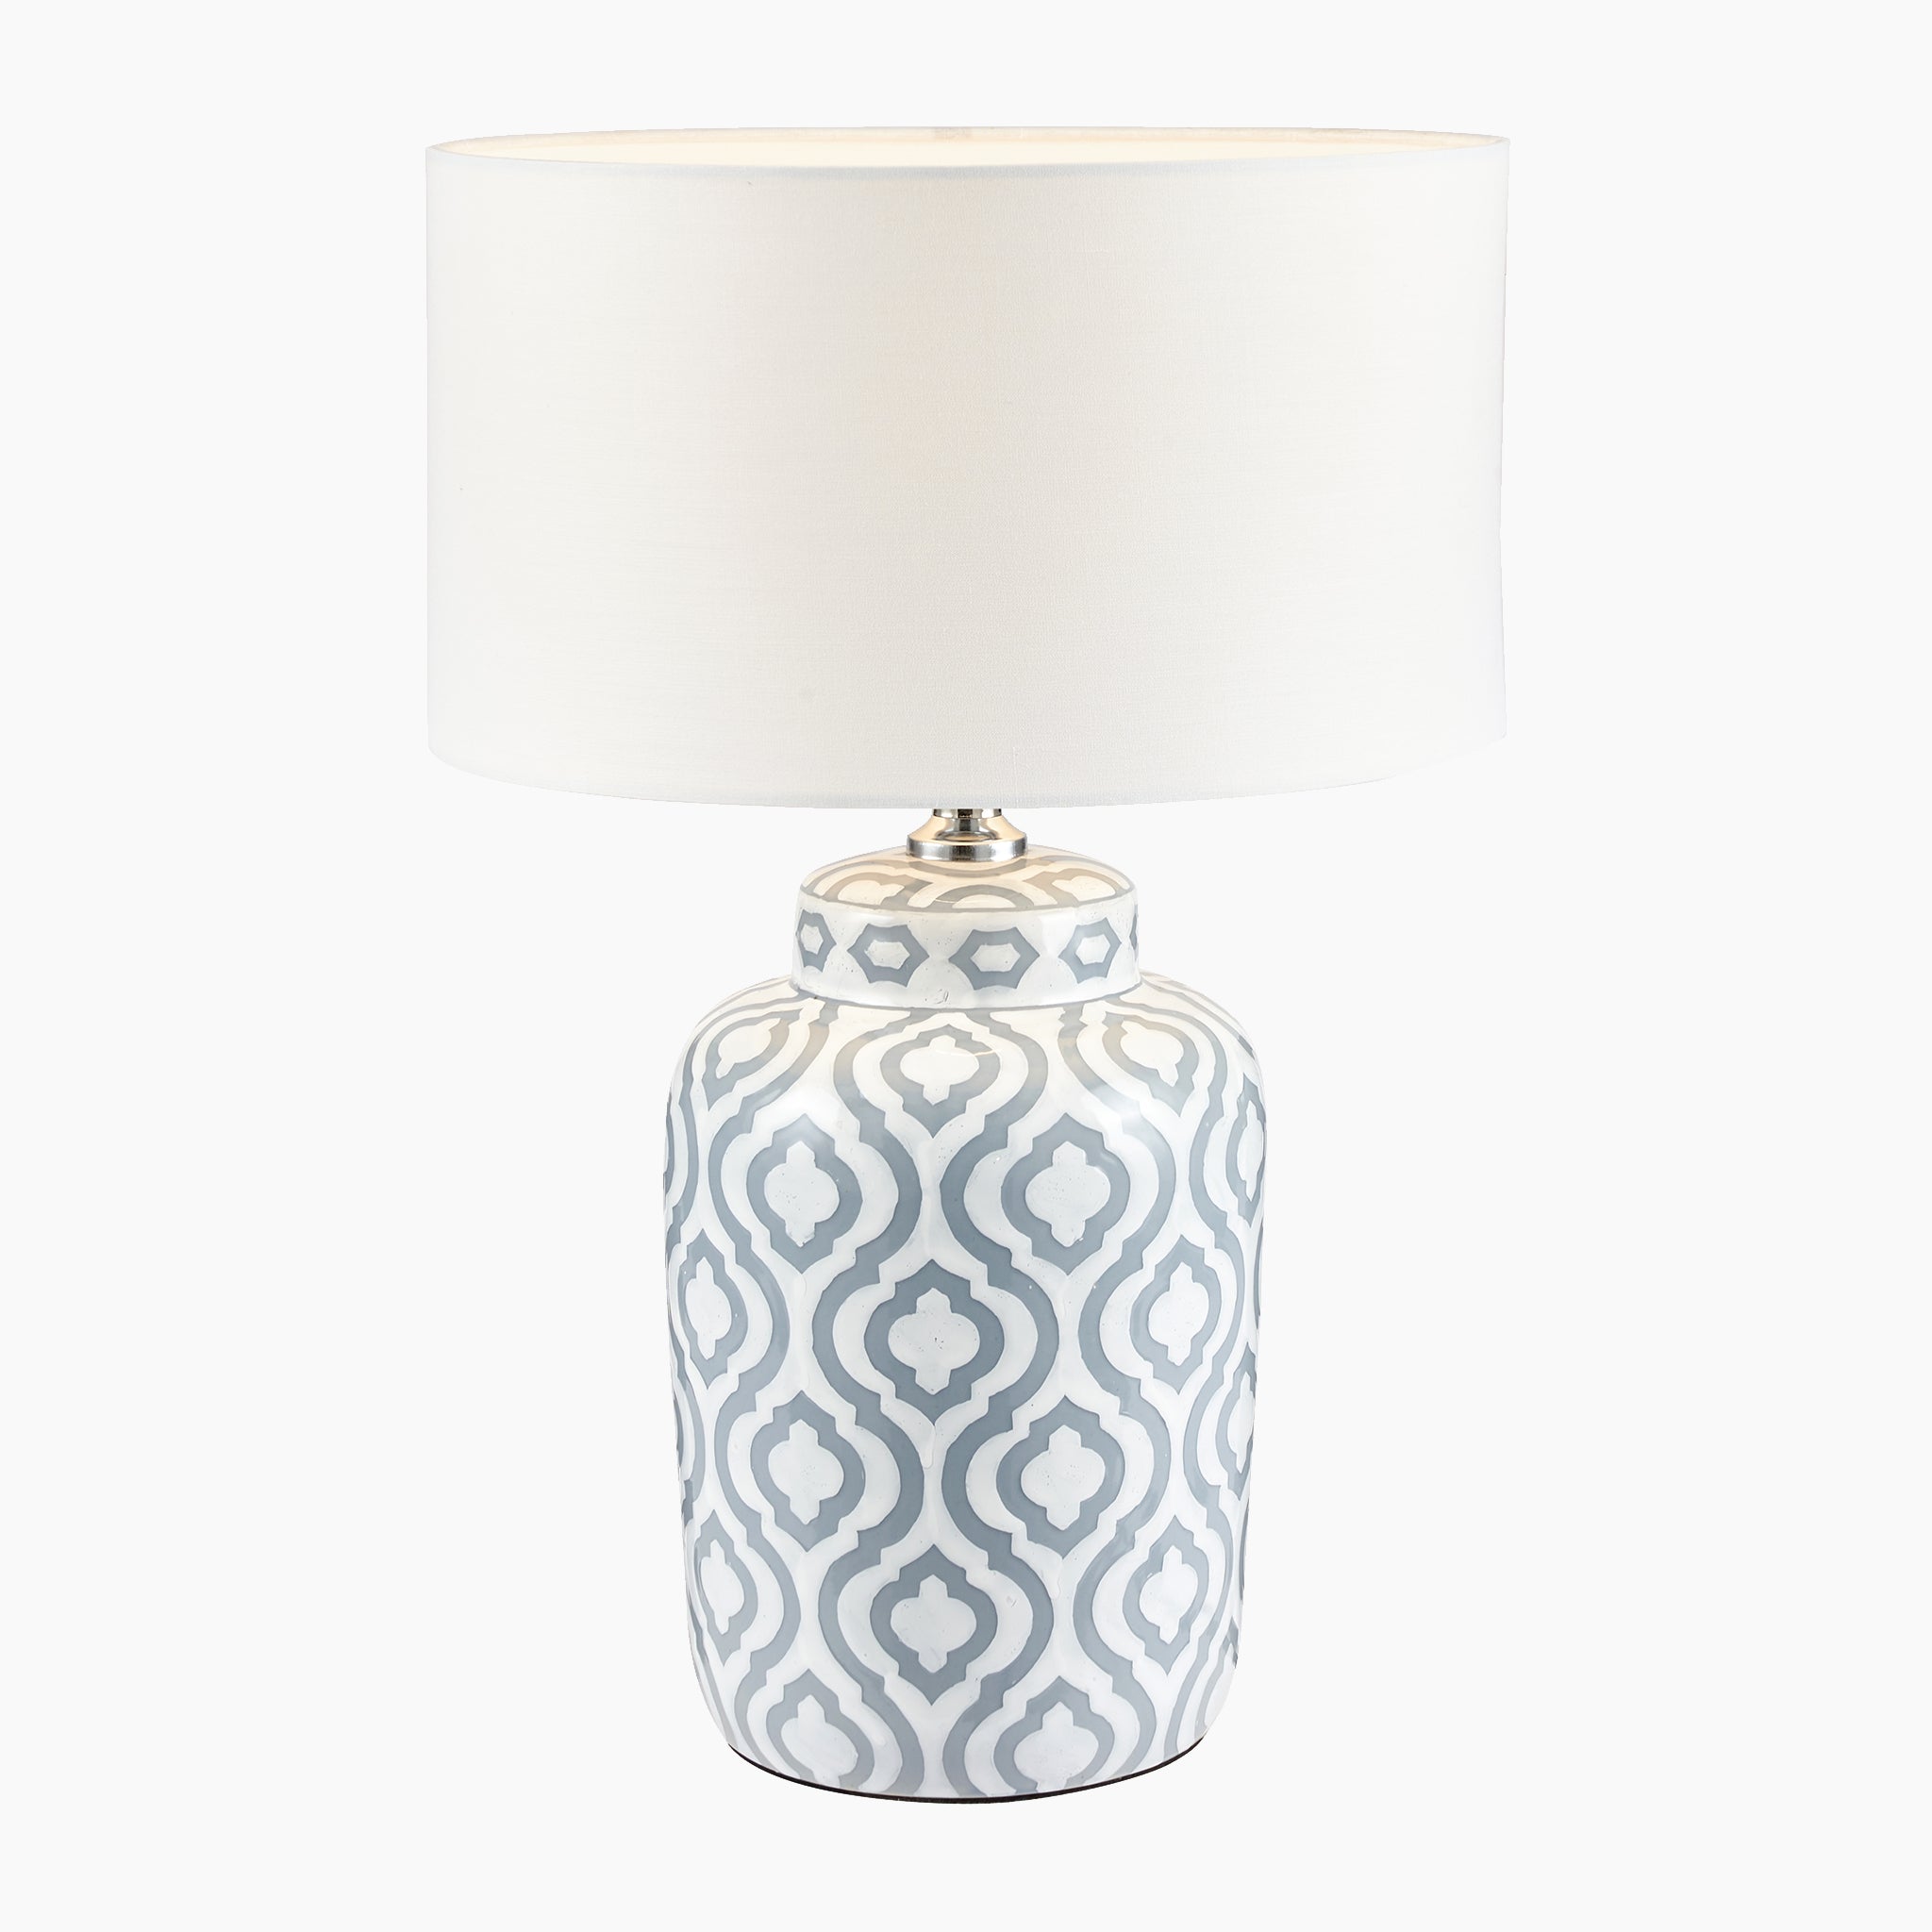 Celia Grey and White Pattern Ceramic Table Lamp